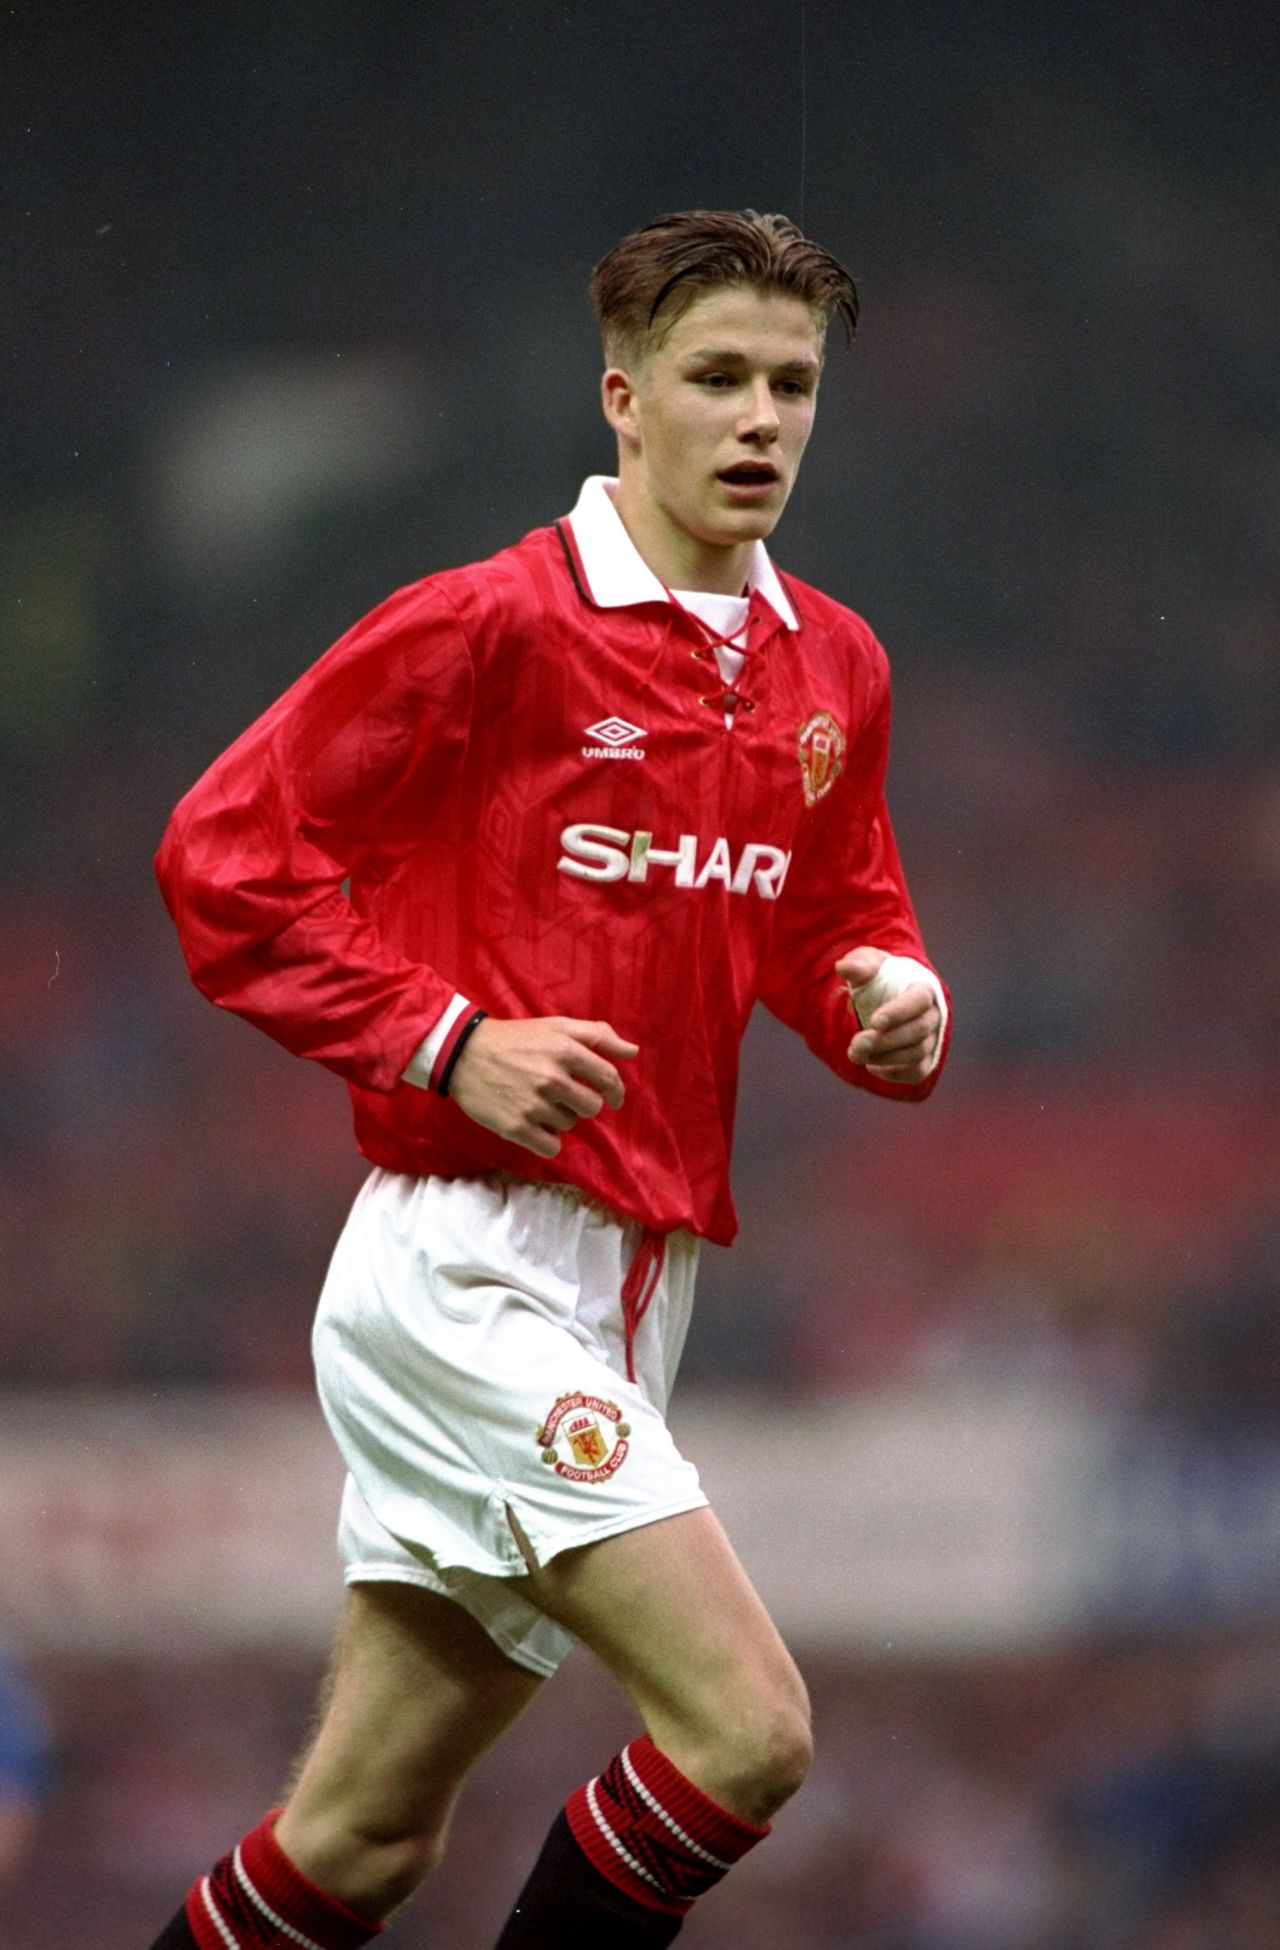 When he started out as a youth player at Manchester United, there was little indication Beckham would be a fashion icon around the world. 